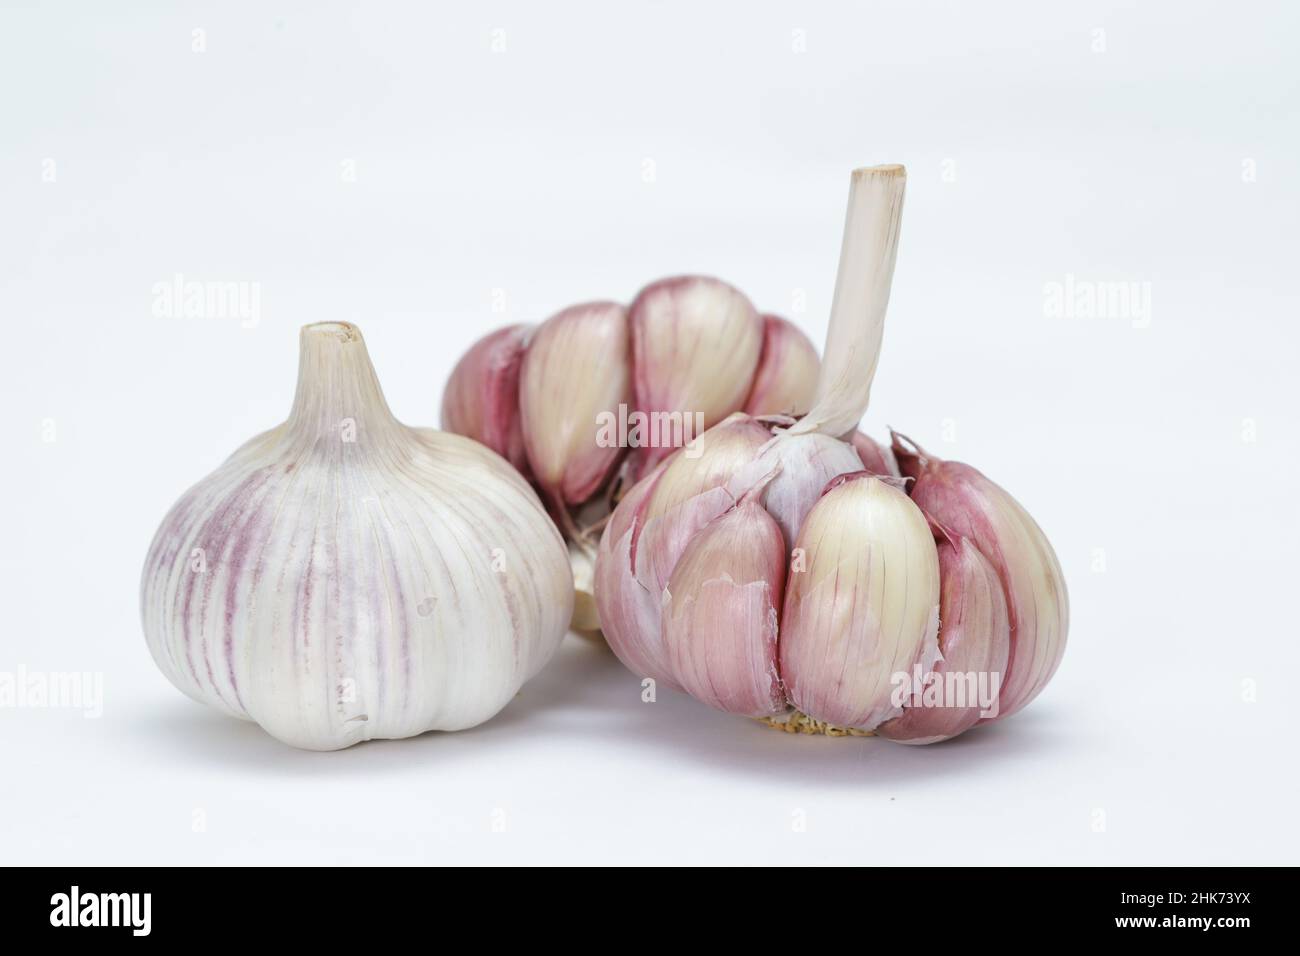 Three heads of garlic (Allium sativum), with one still unpeeled and the other two lightly peeled, each clove can be seen in rosy tones on the edges an Stock Photo